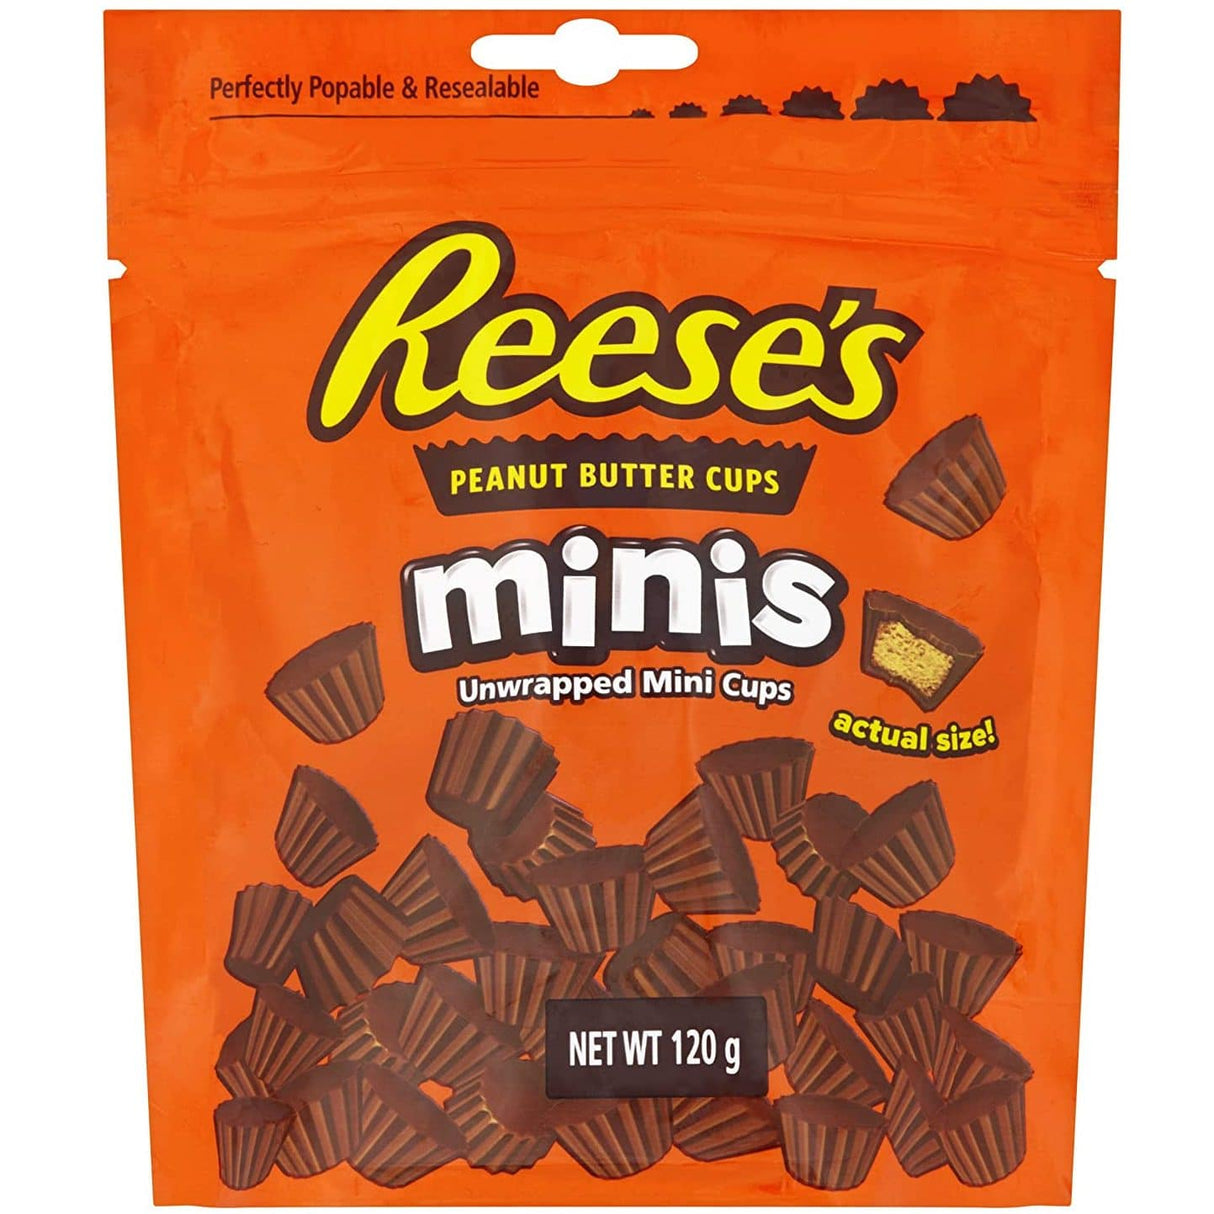 Reese's Peanut Butter Cups Minis (120g)